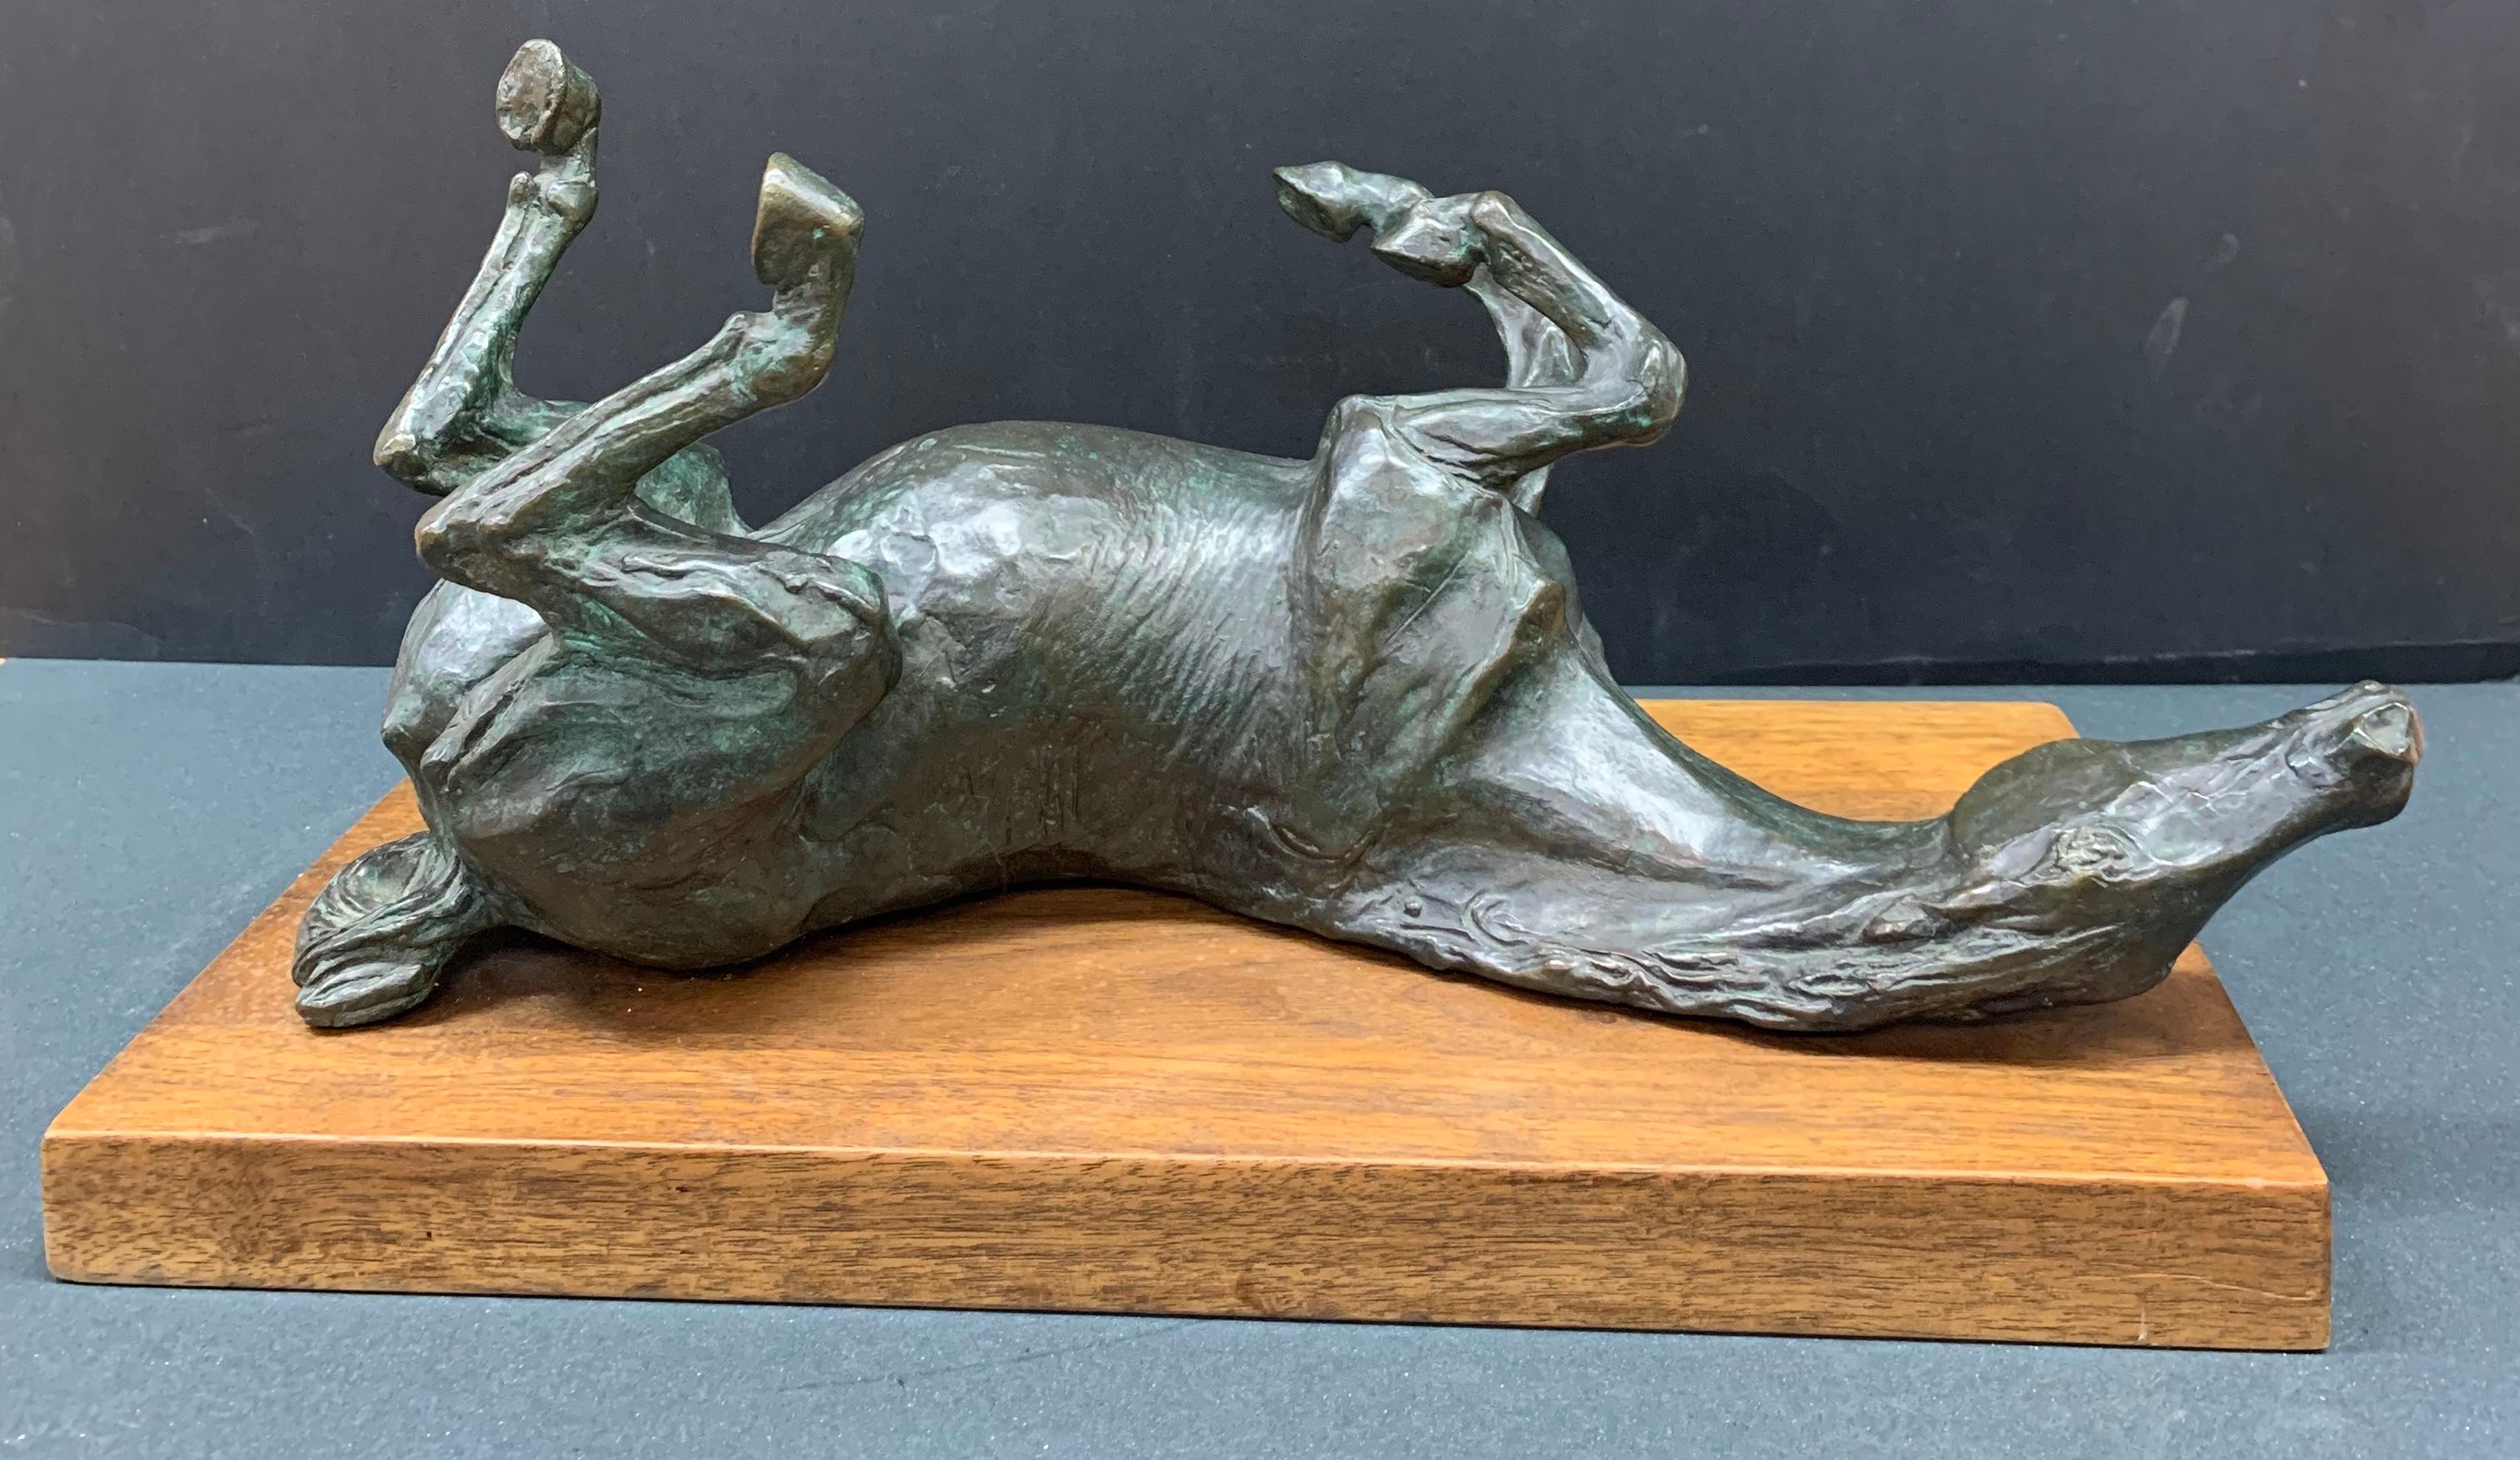 Dmitri Tougarinov
1990
3/9 from the edition of 9
Bronze sculpture 
Signed in bronzed
16 x 6 x 5 inches